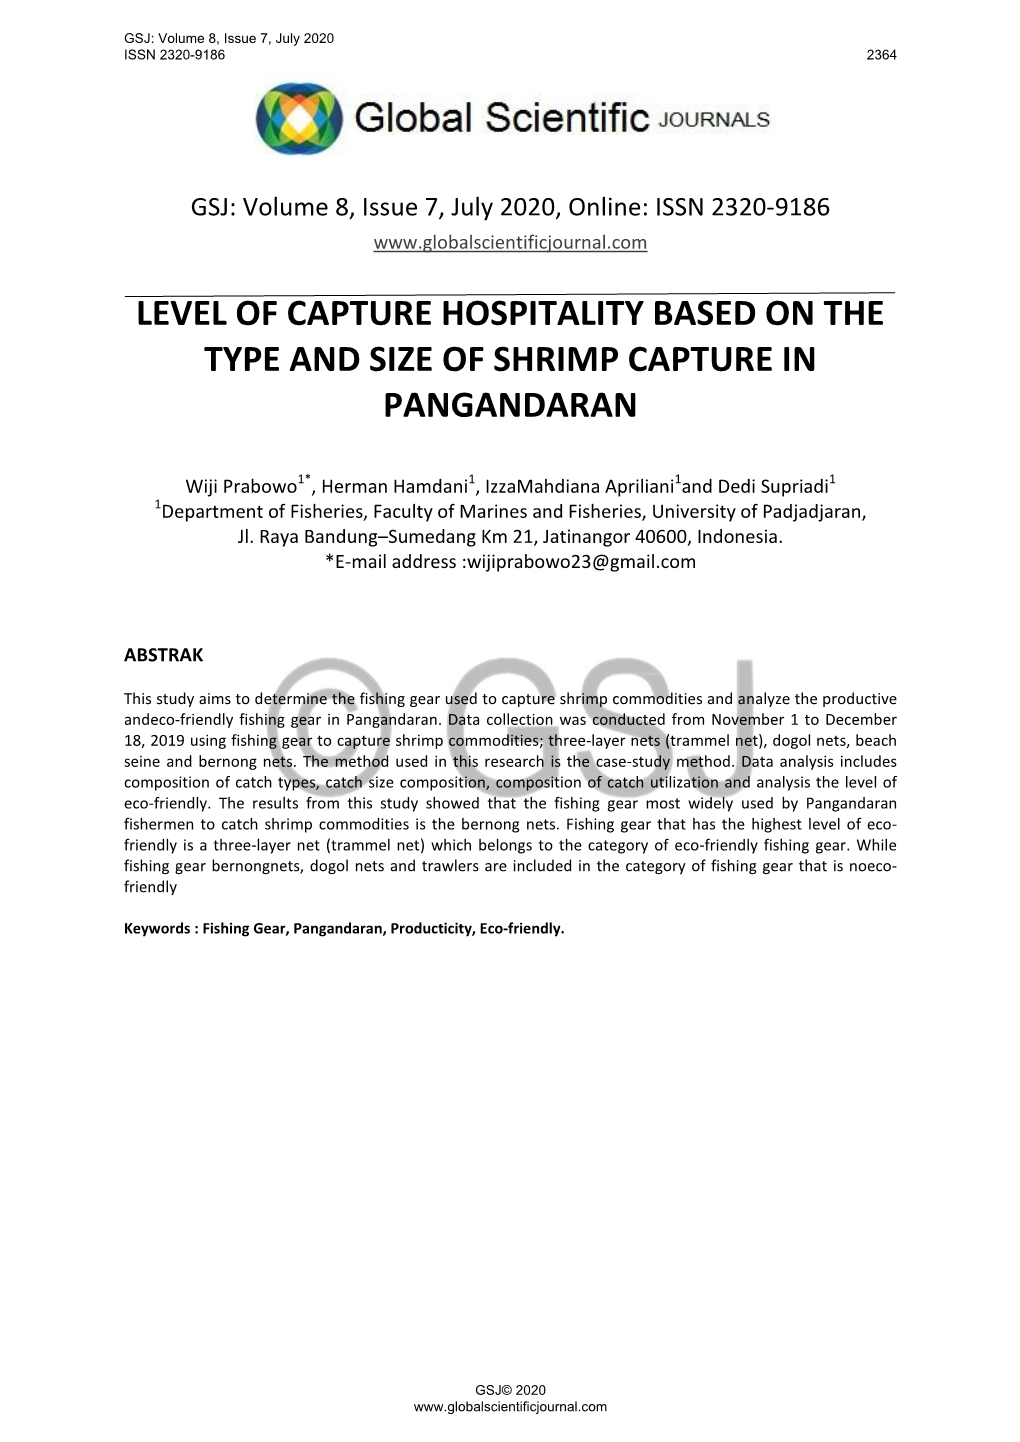 Level of Capture Hospitality Based on the Type and Size of Shrimp Capture in Pangandaran